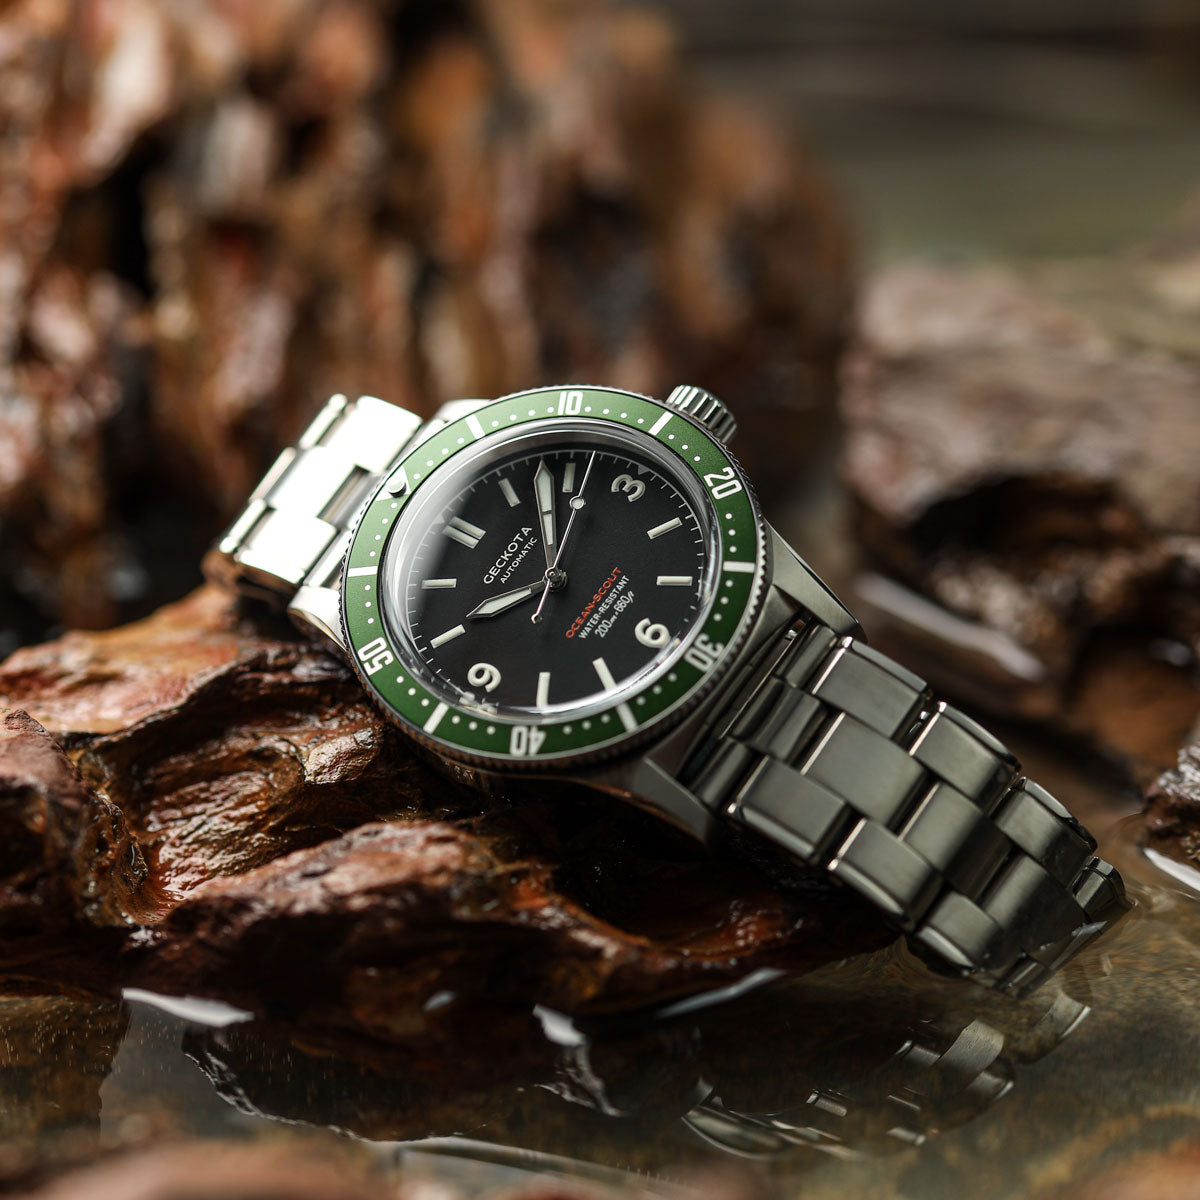 Geckota Ocean-Scout Dive Watch - Emerald Green - Berwick Stainless Steel Strap - additional image 2